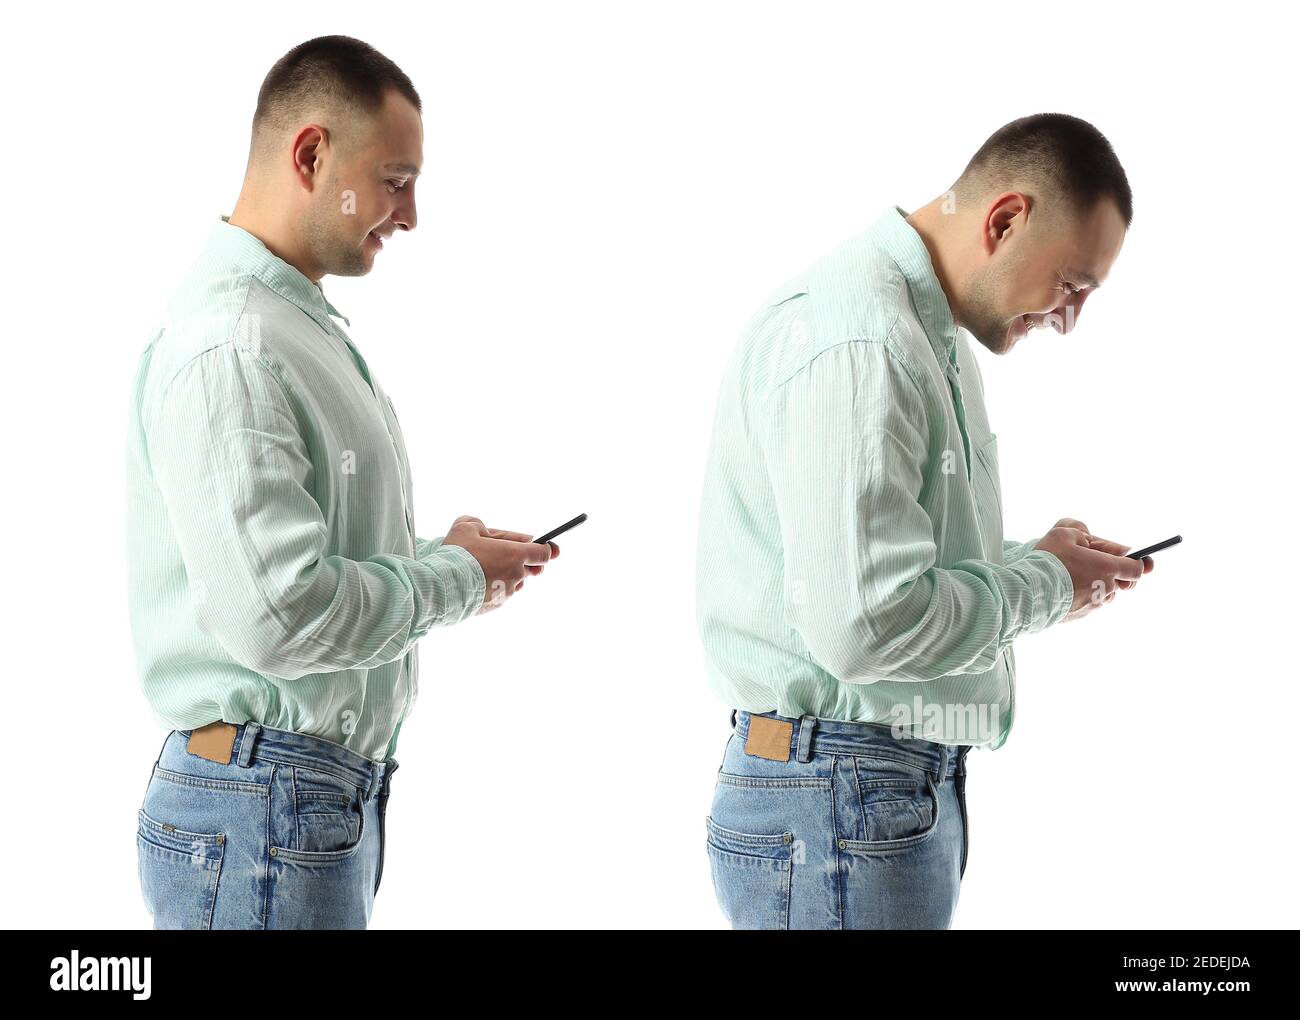 Man with proper and bad posture using mobile phone on white background Stock Photo